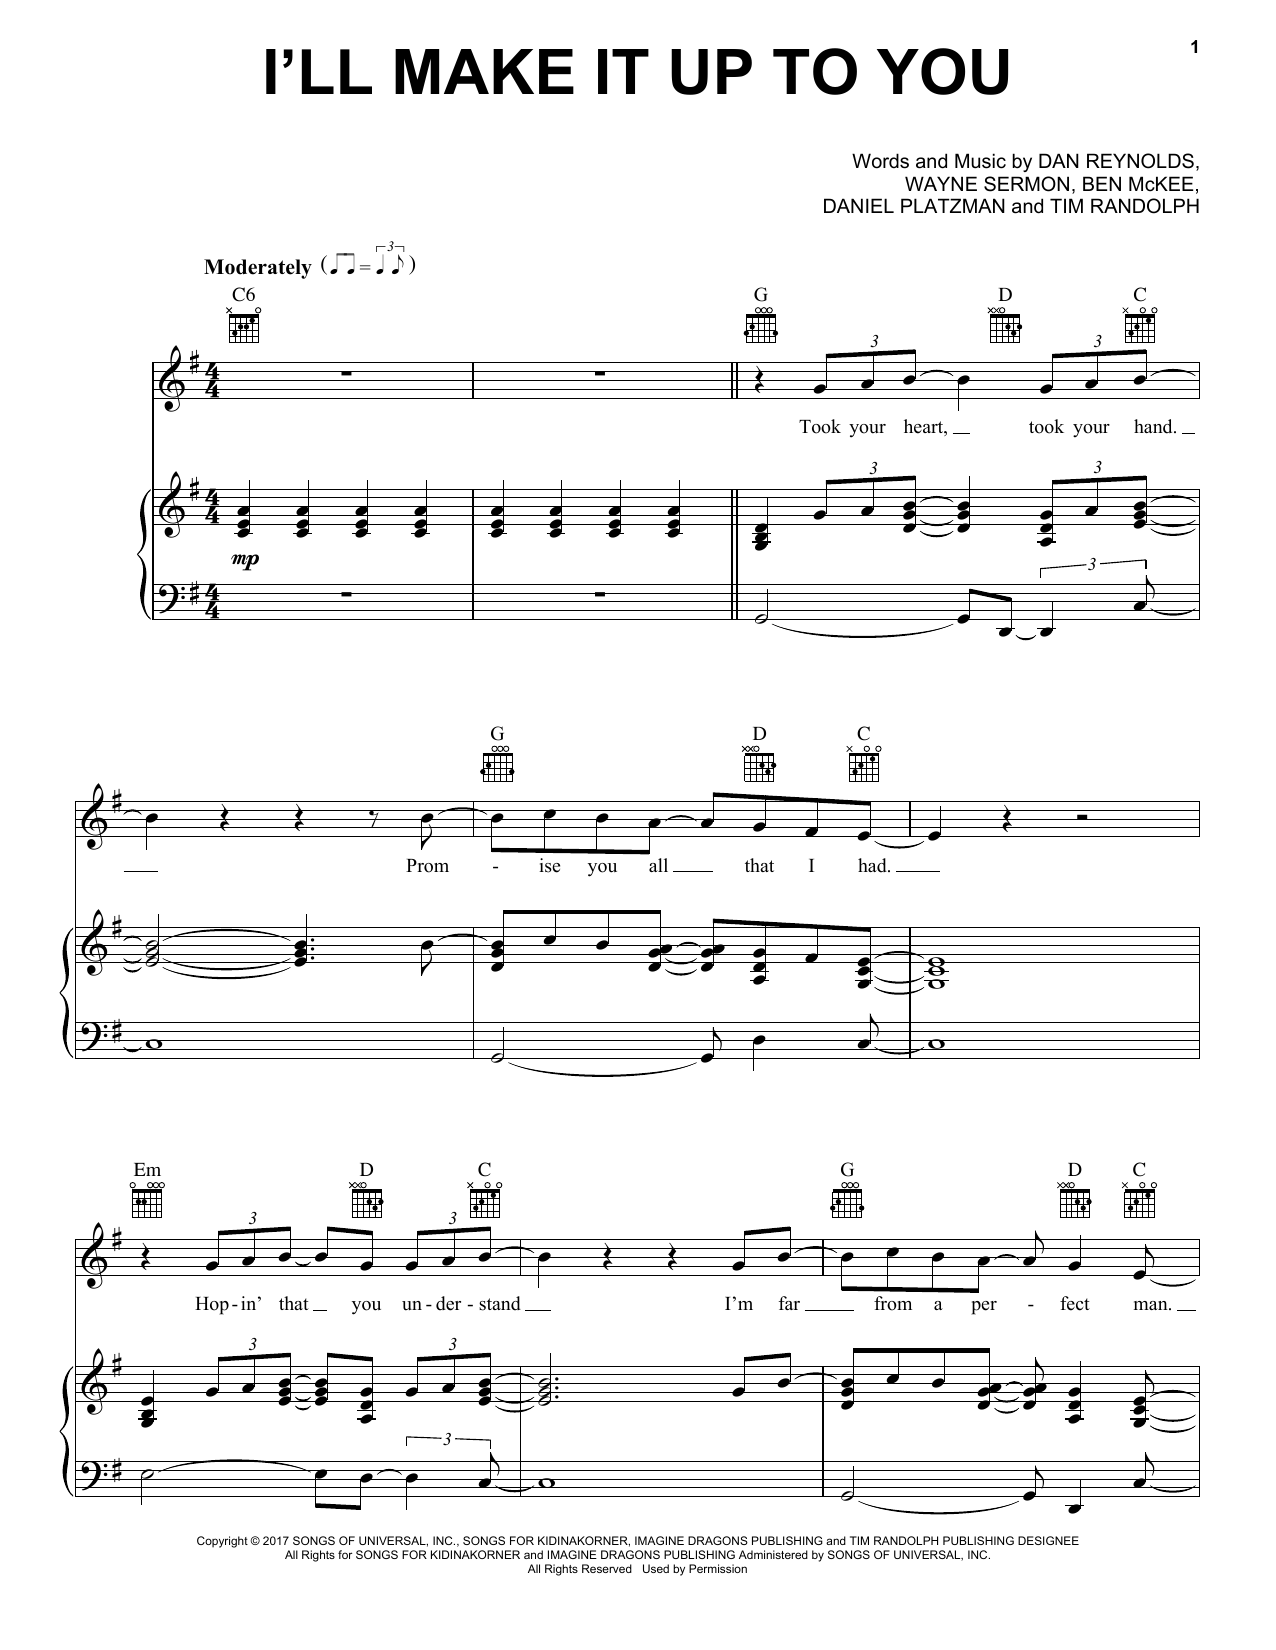 Download Imagine Dragons I'll Make It Up To You Sheet Music